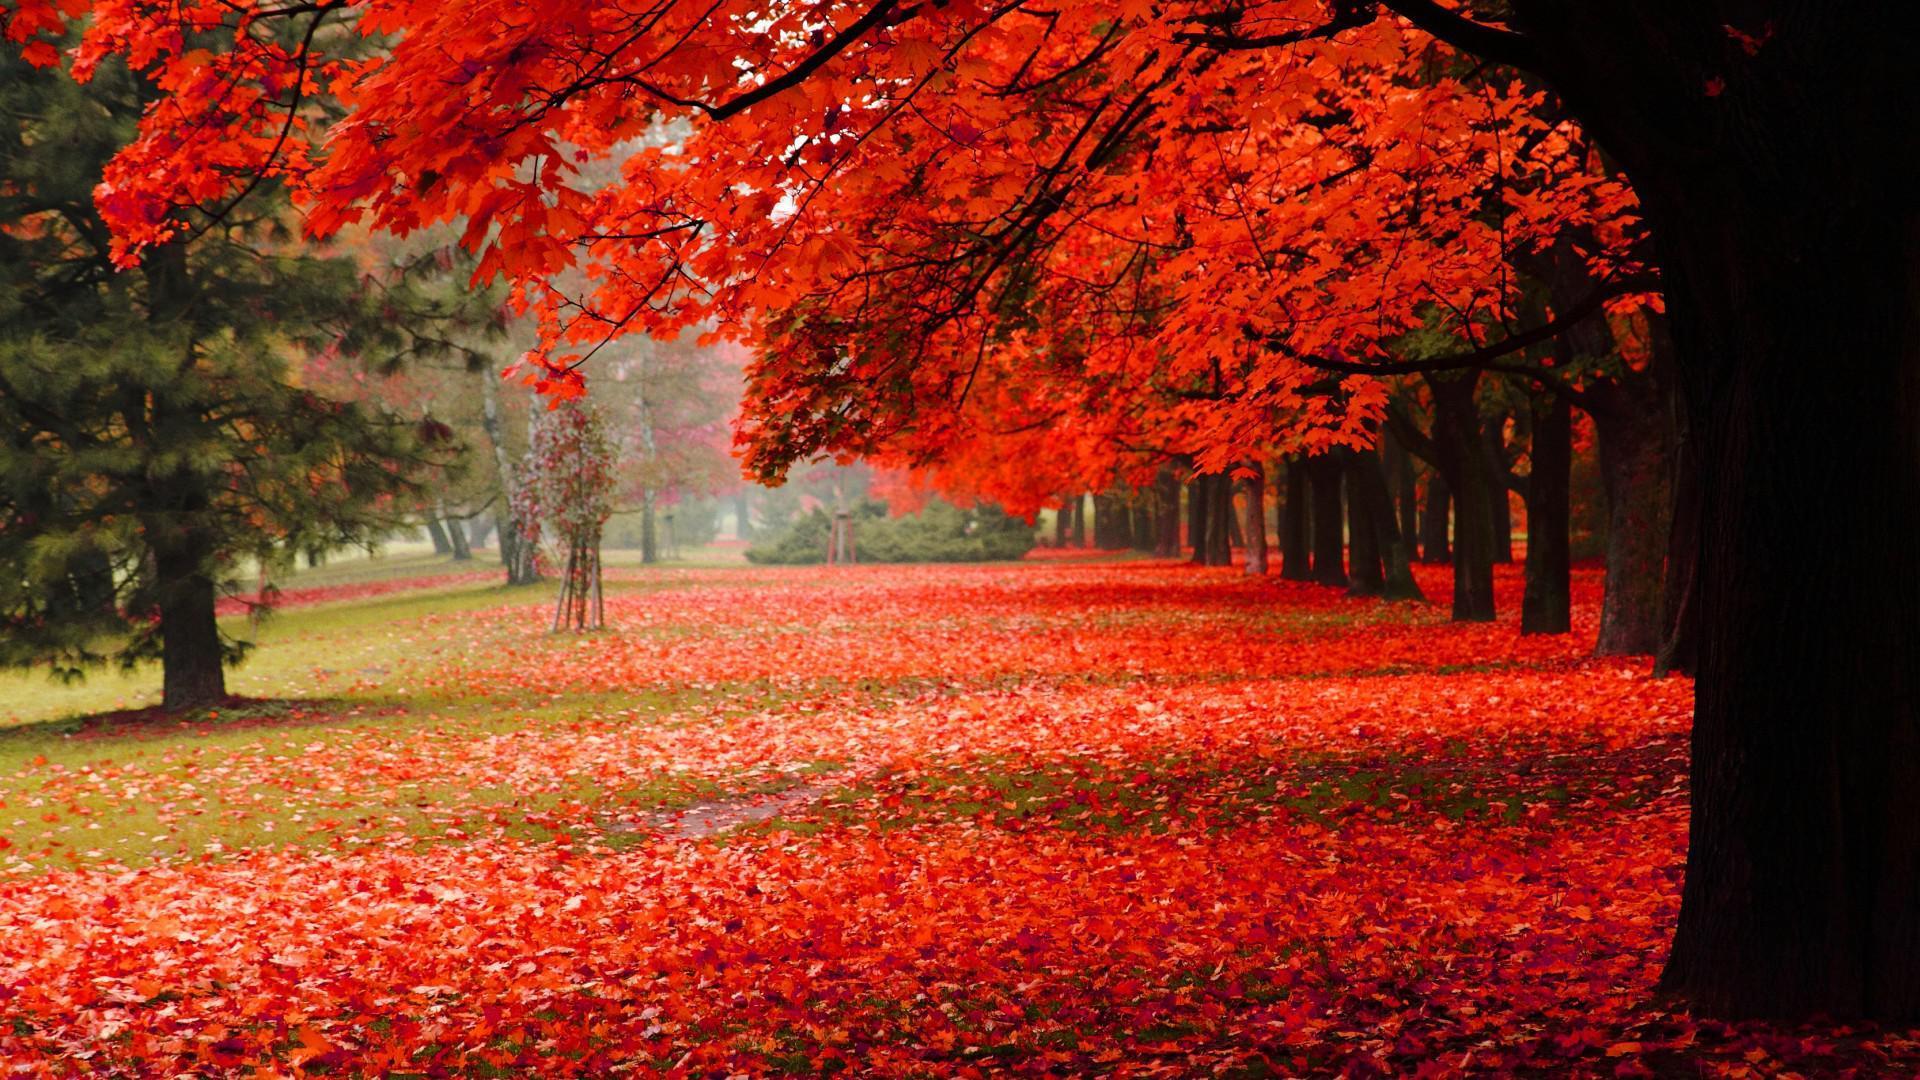 wallpaper Natural, park, autumn, red leaves, autumn scenery HD